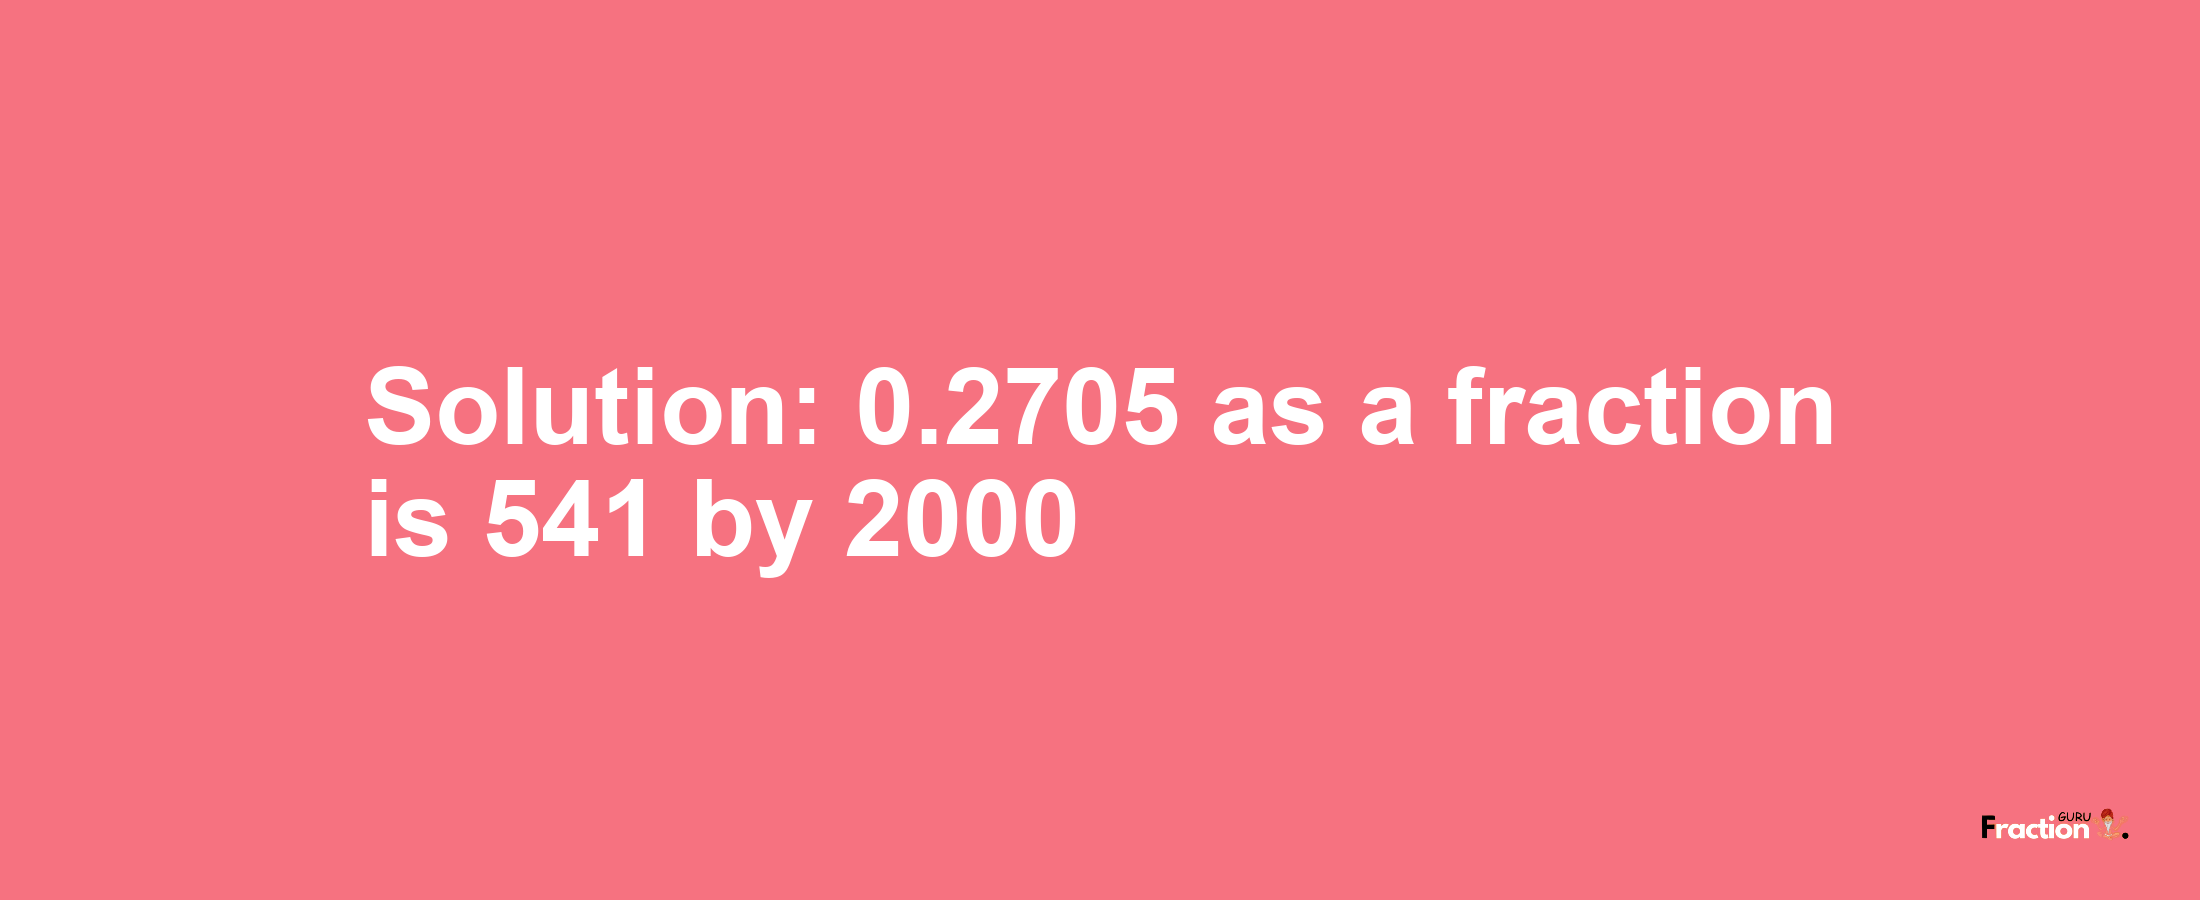 Solution:0.2705 as a fraction is 541/2000